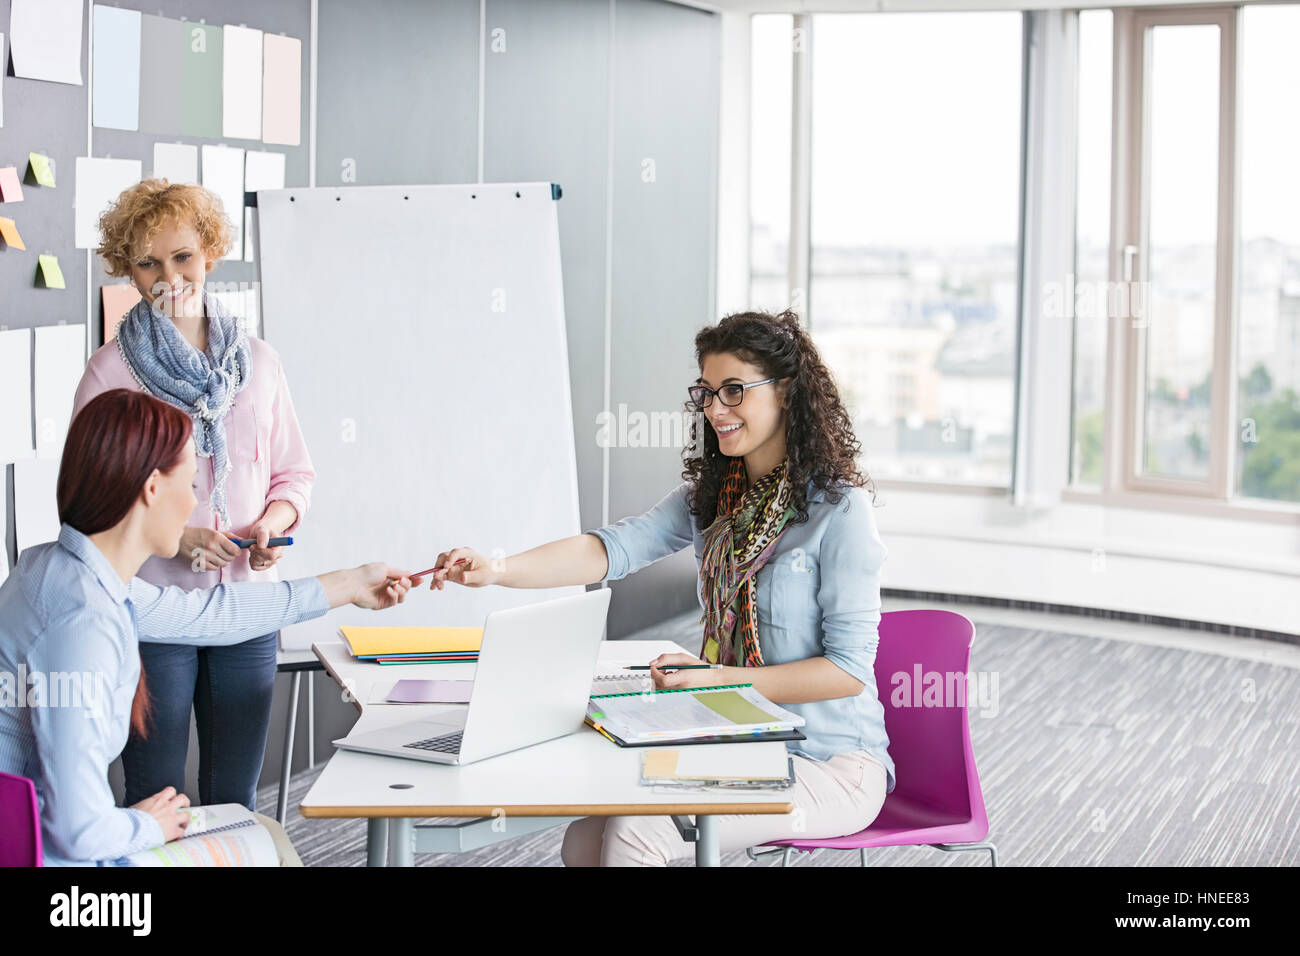 Businesswomen working together in creative office Stock Photo